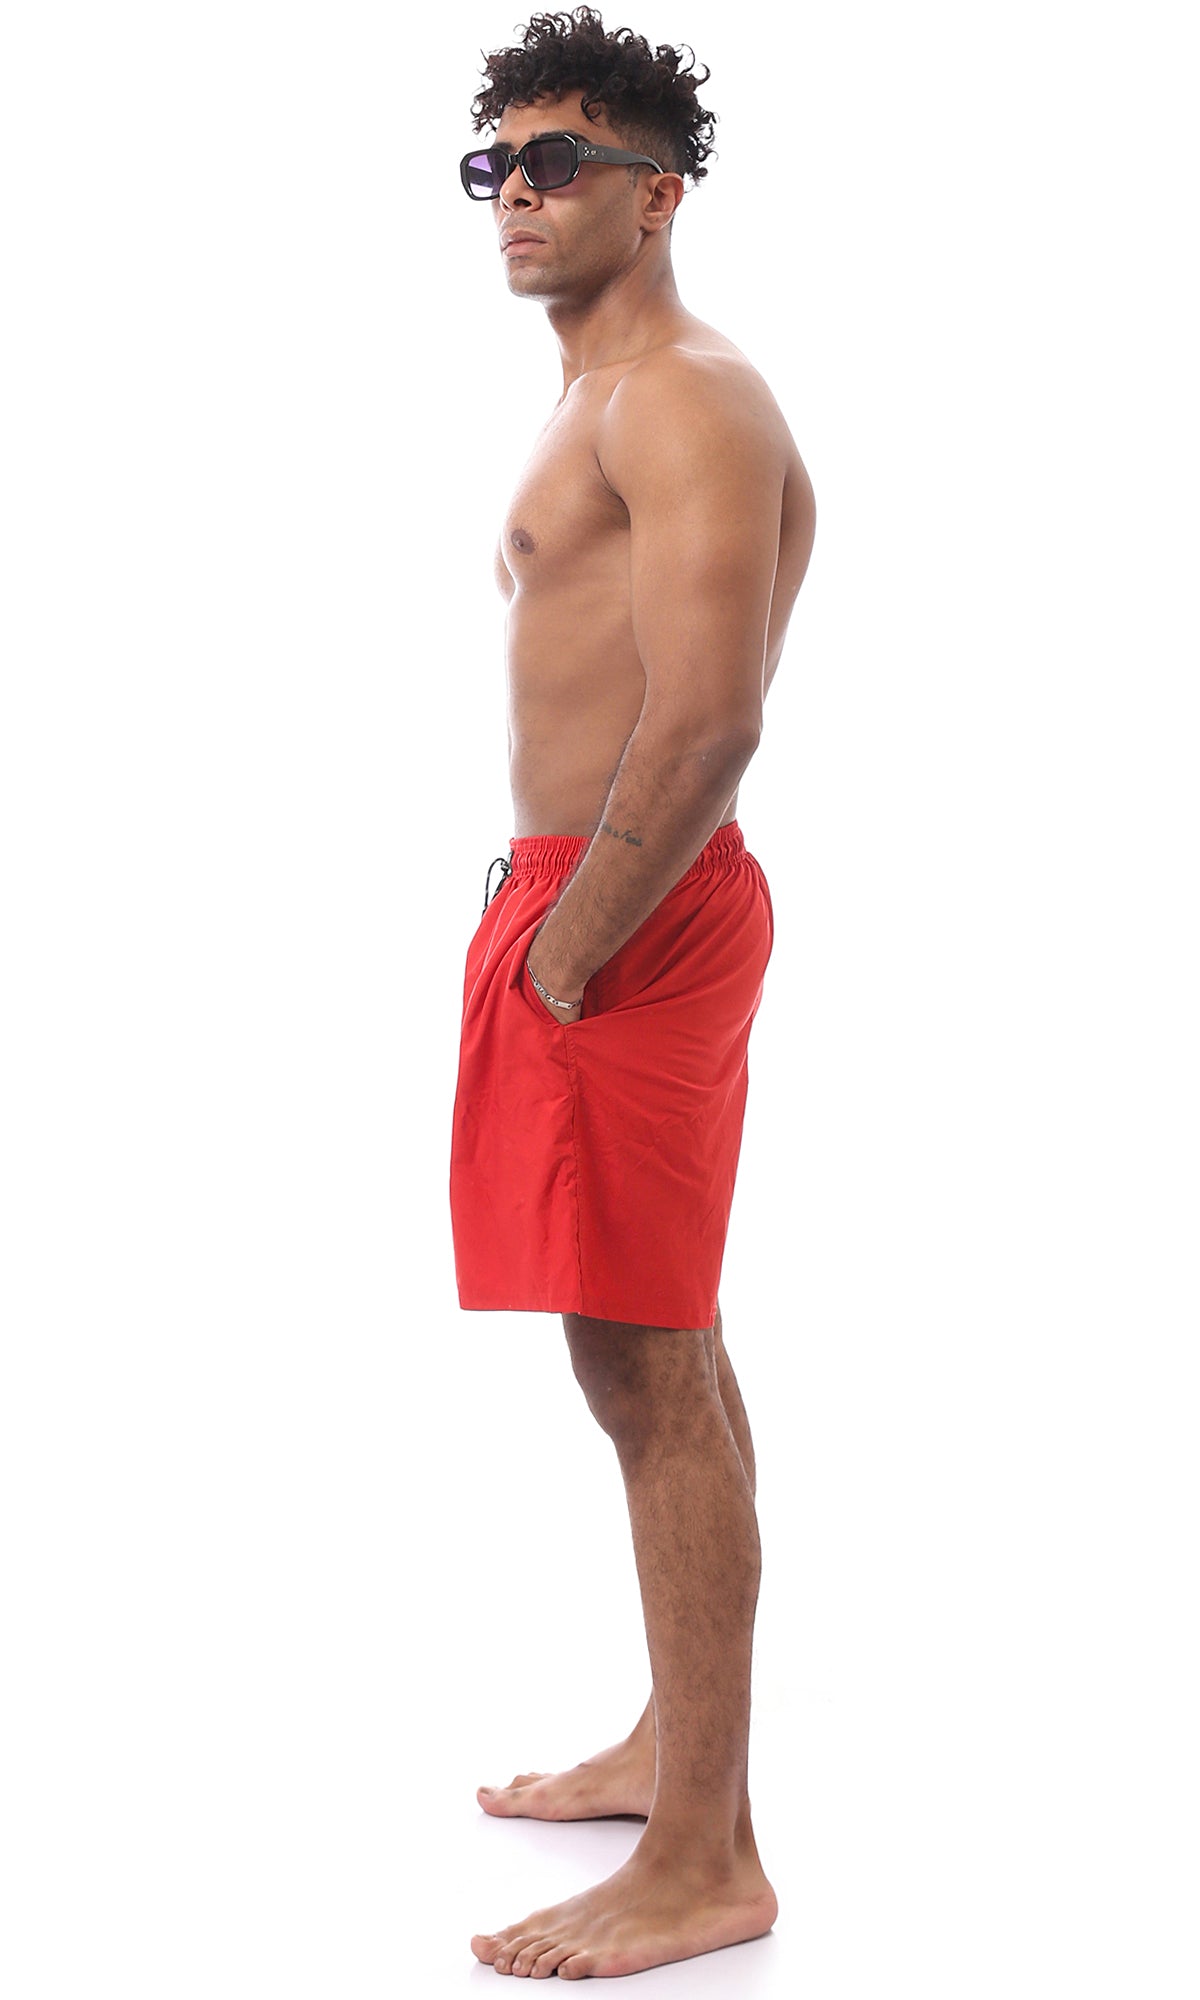 O170437 Slip On Red Comfy Board Shorts